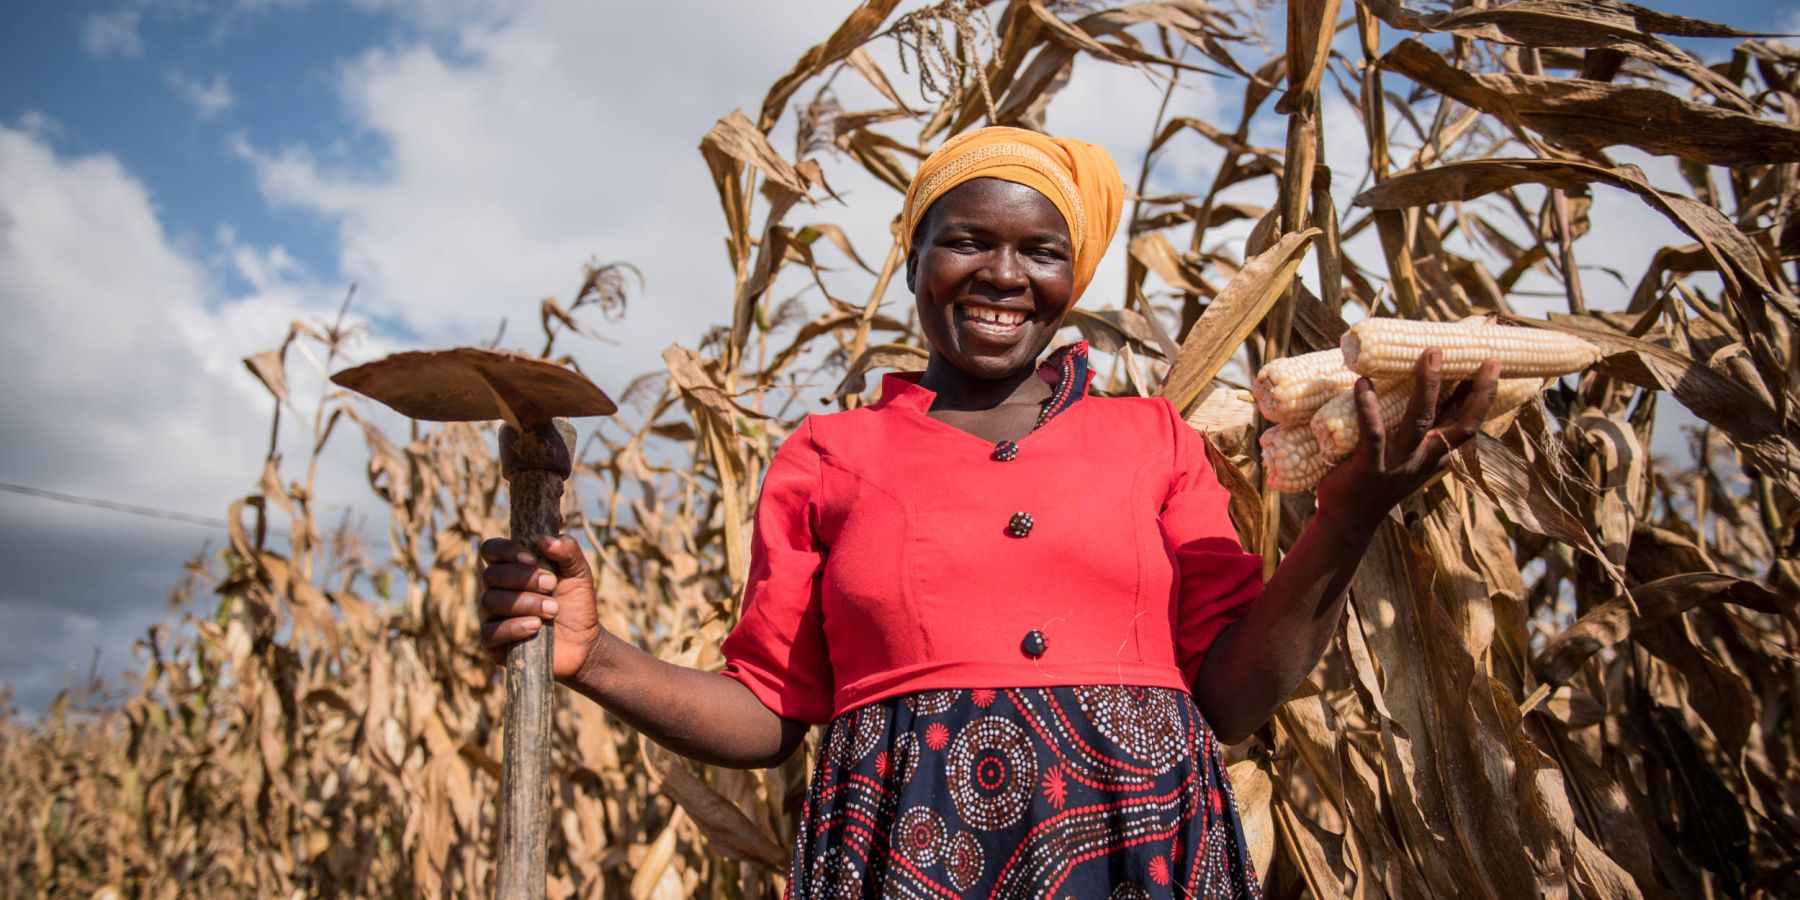 A woman farmer smiles as she poses in a field holding some cobs of corn